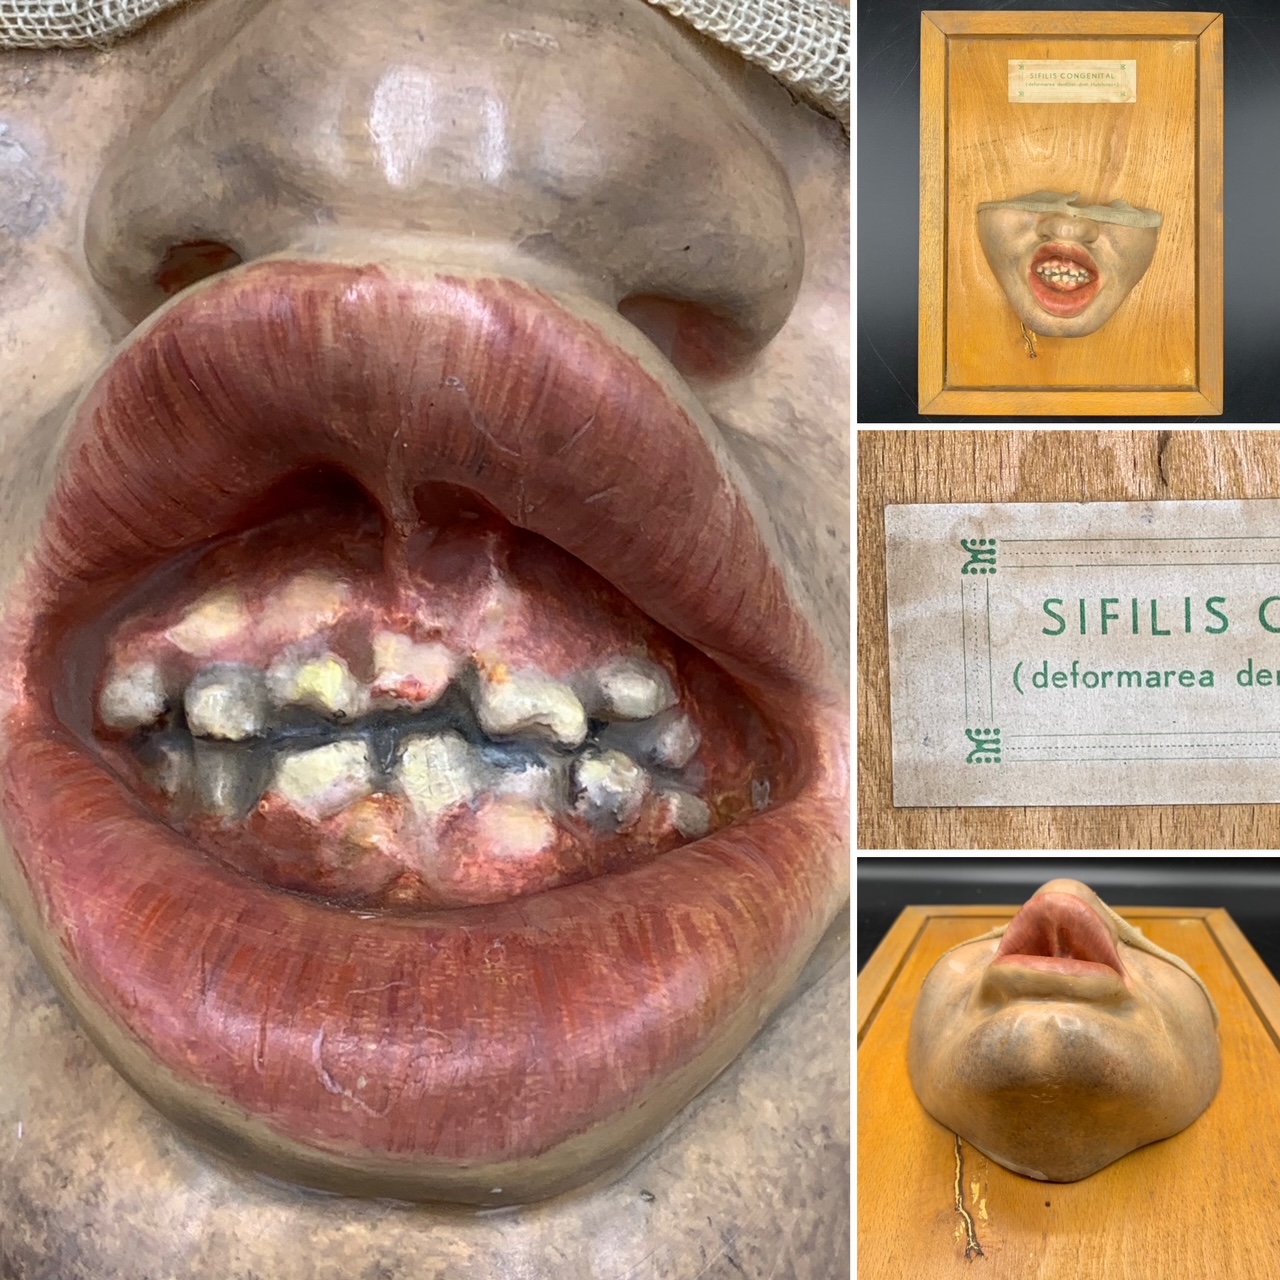 Wax anatomical model of the syphilis effects